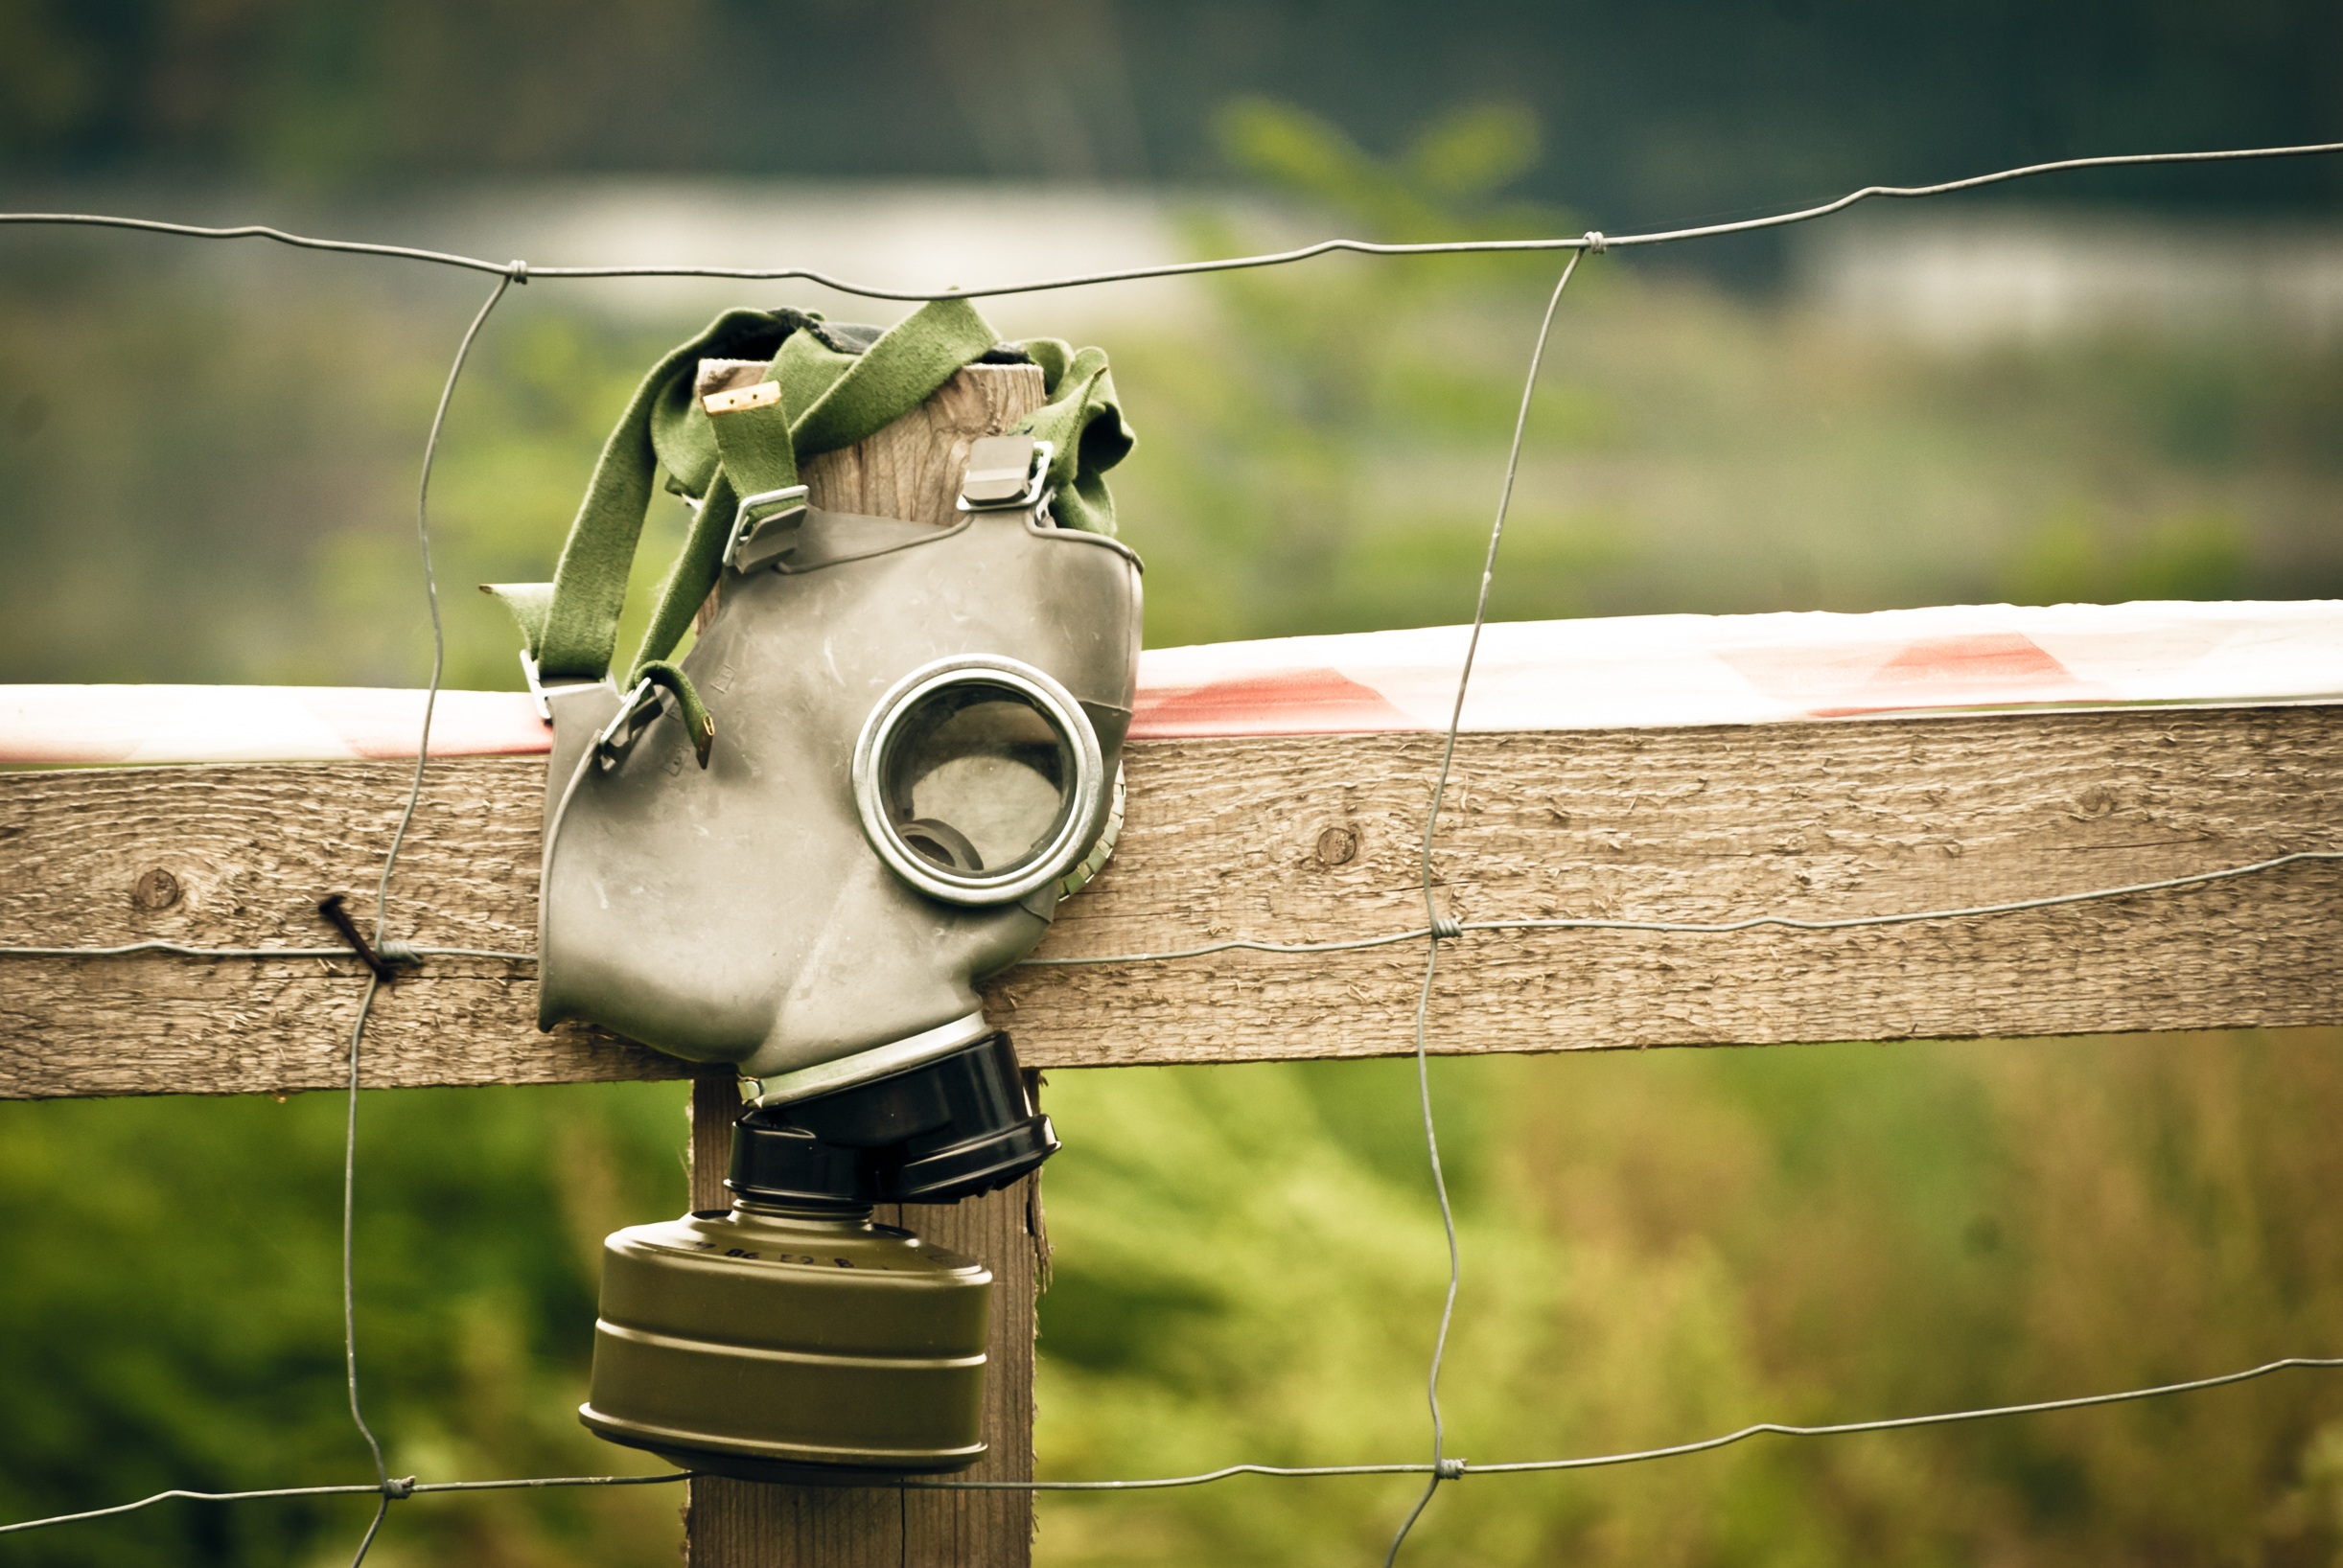 A gas mask left on the fence